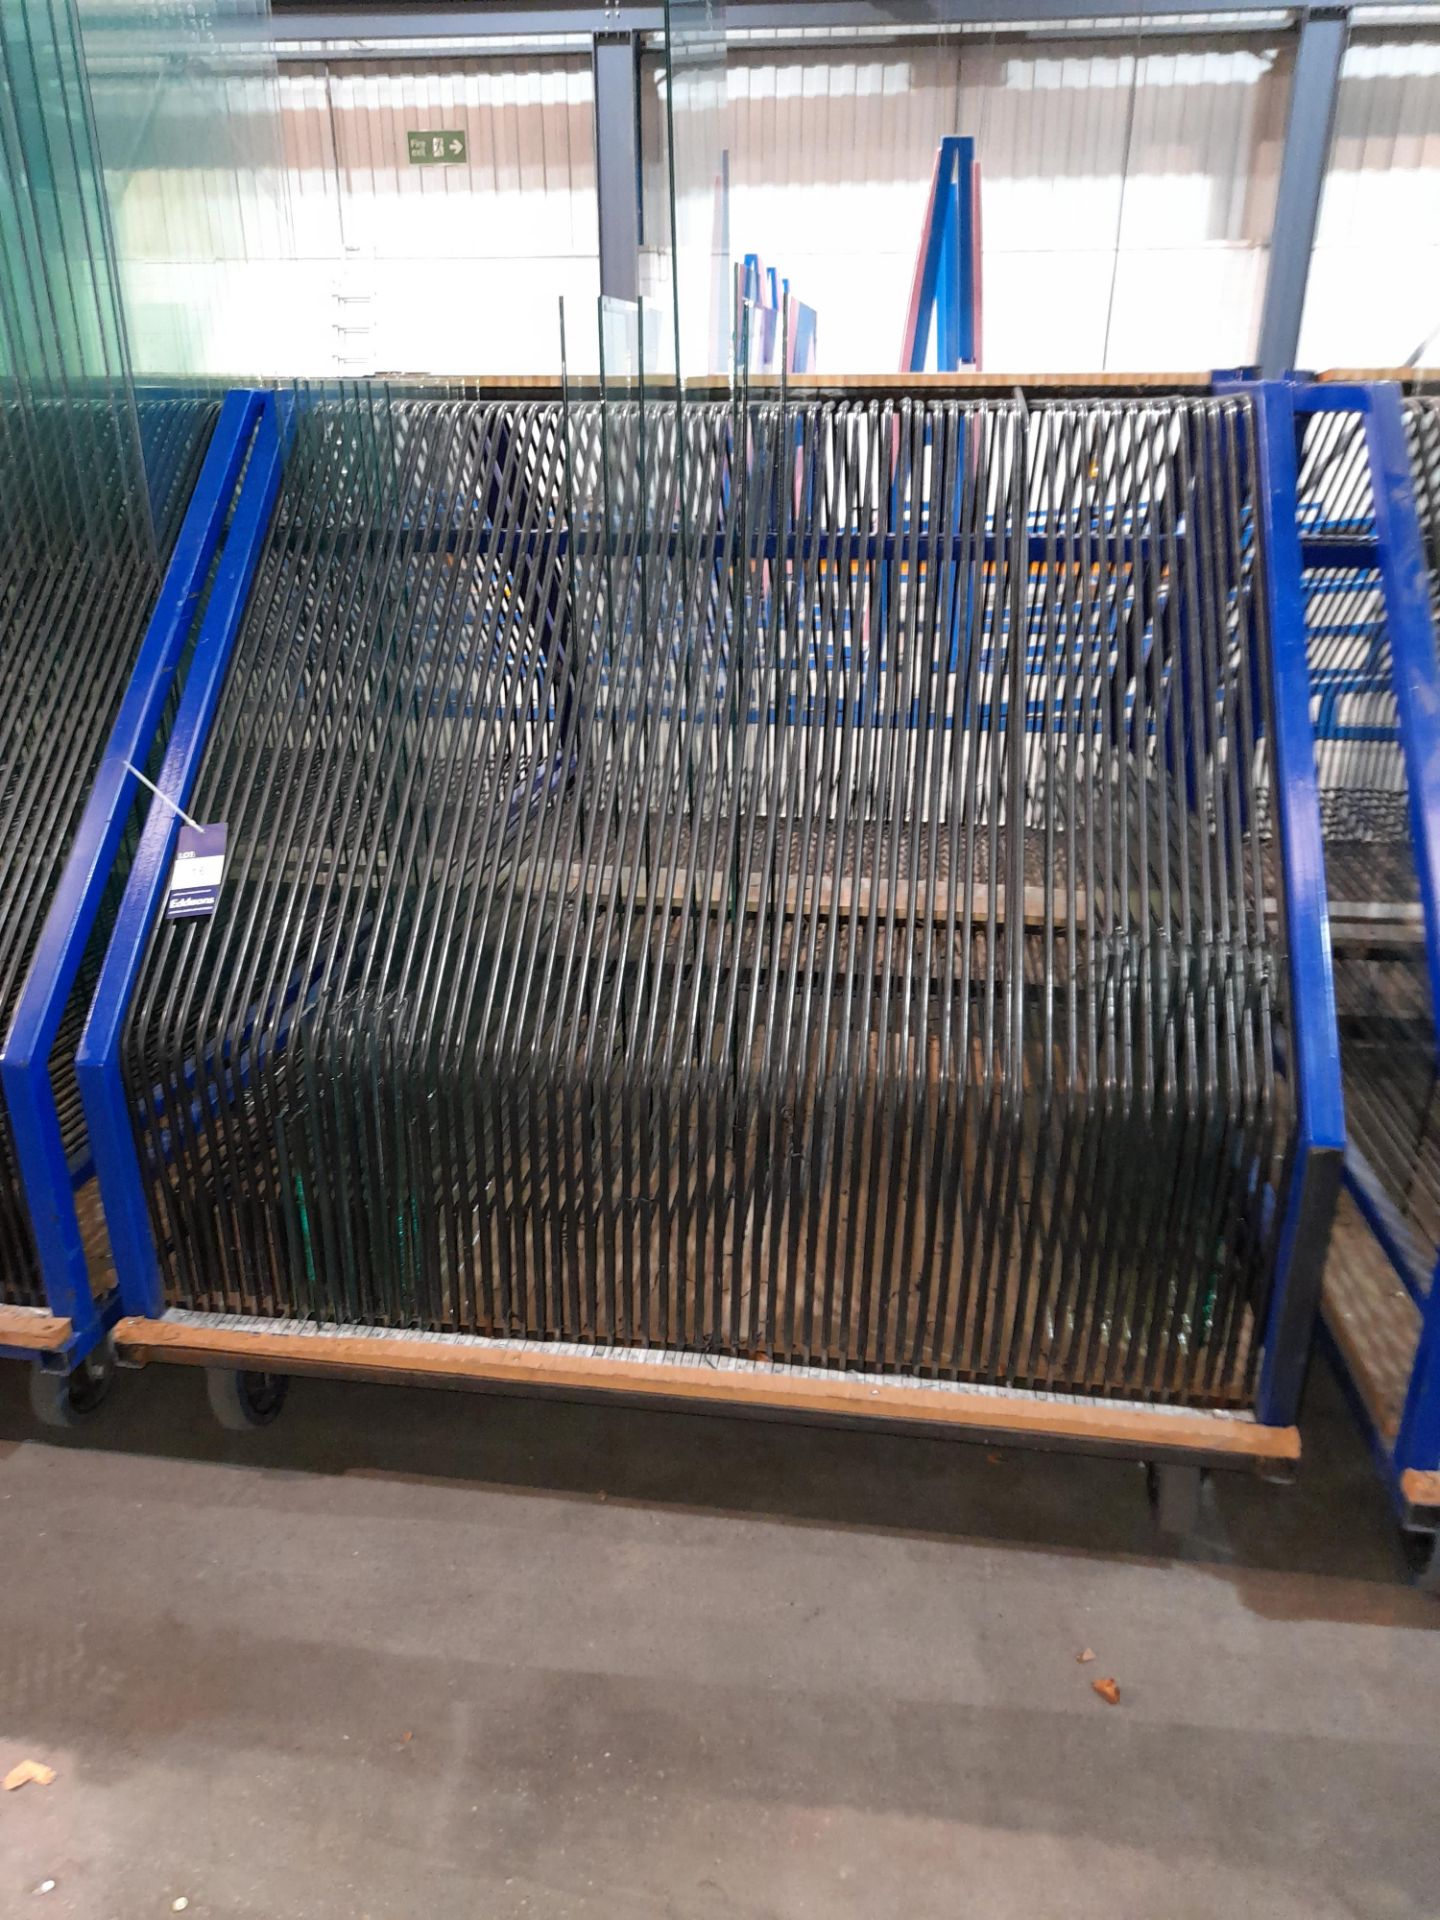 2 x Mobile glass sheet stock trolleys, with contents (Buyer must removal all)